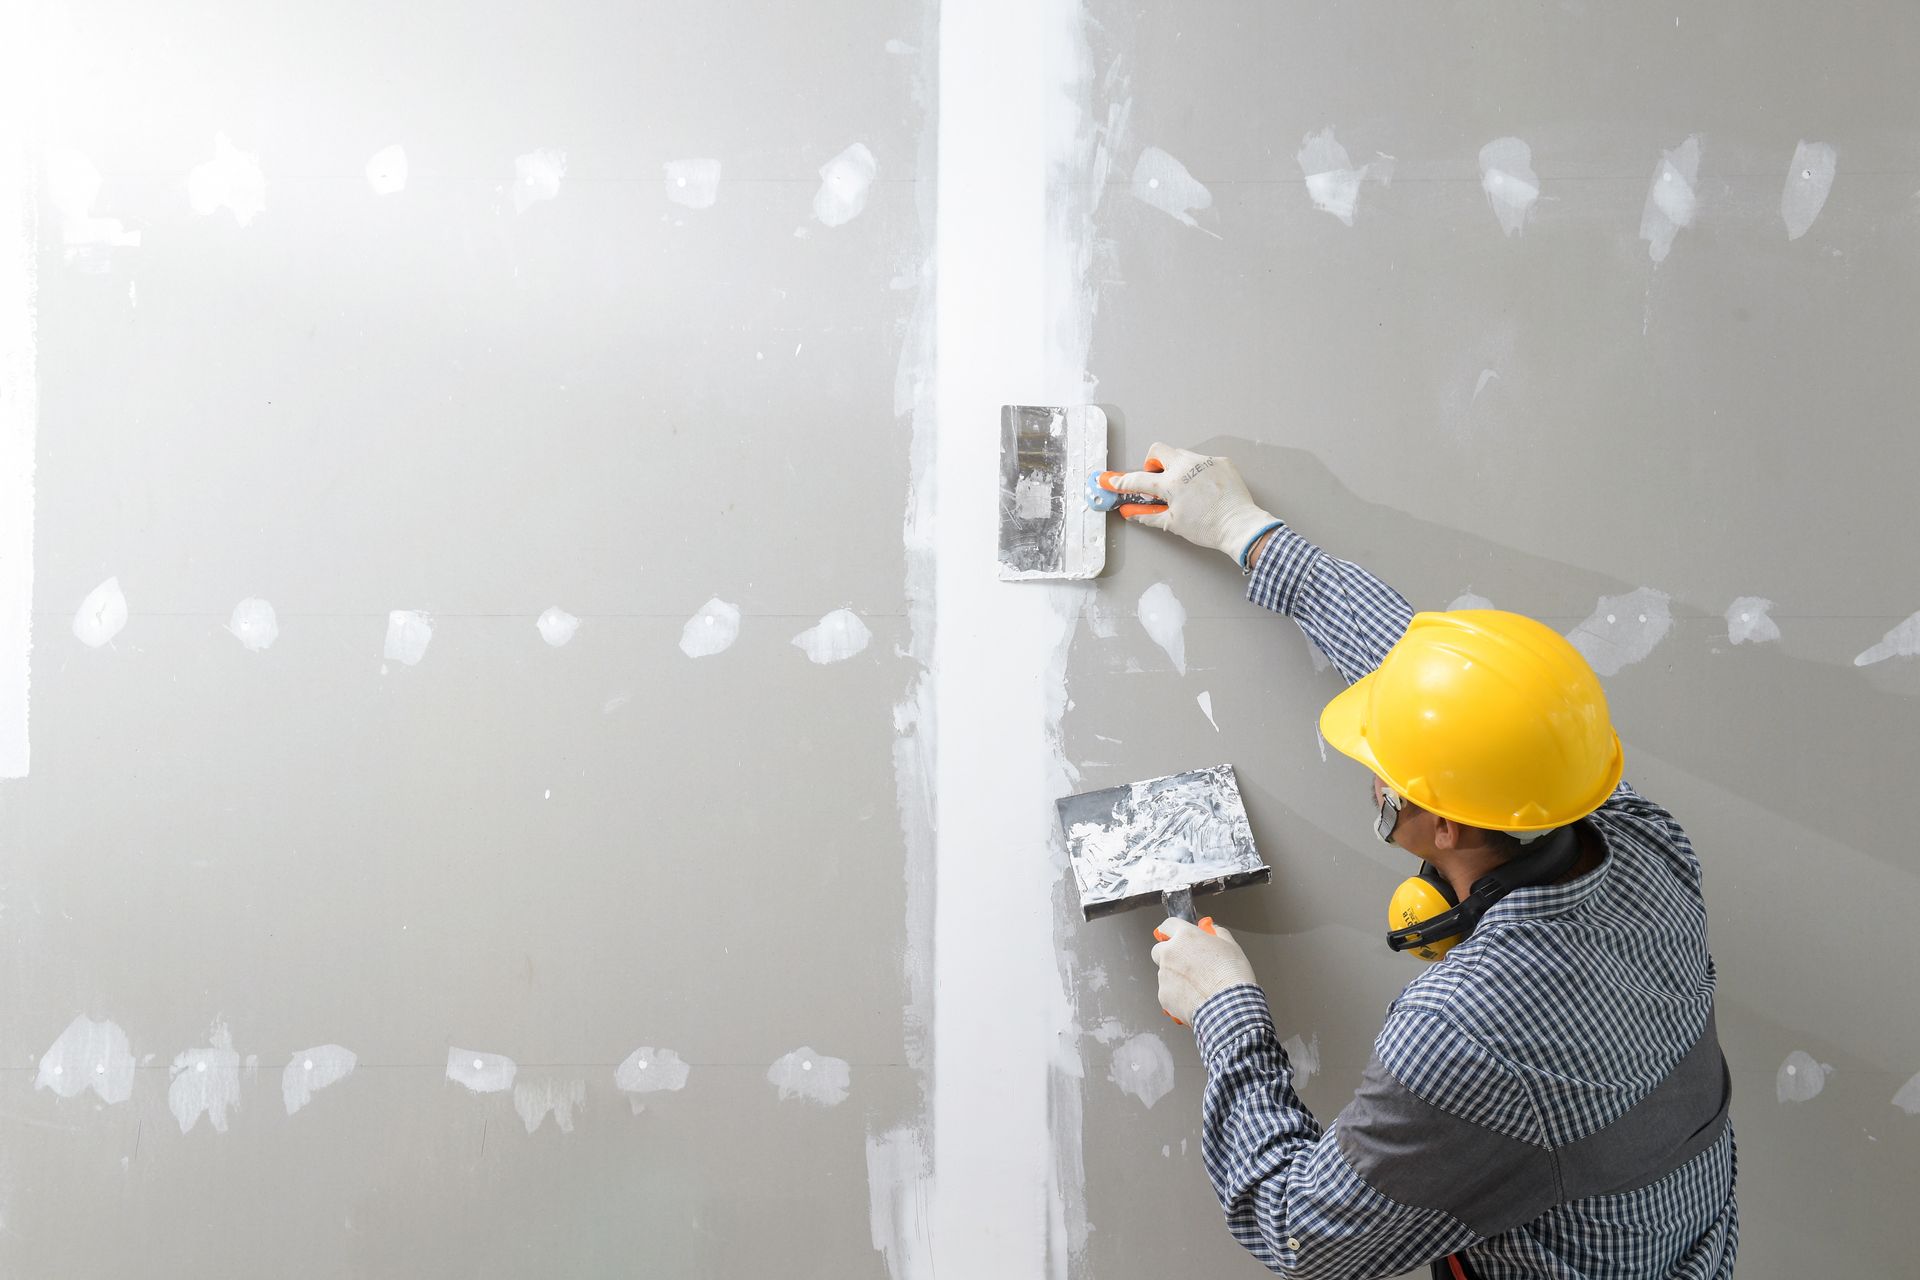 An image showing a person repairing drywall.